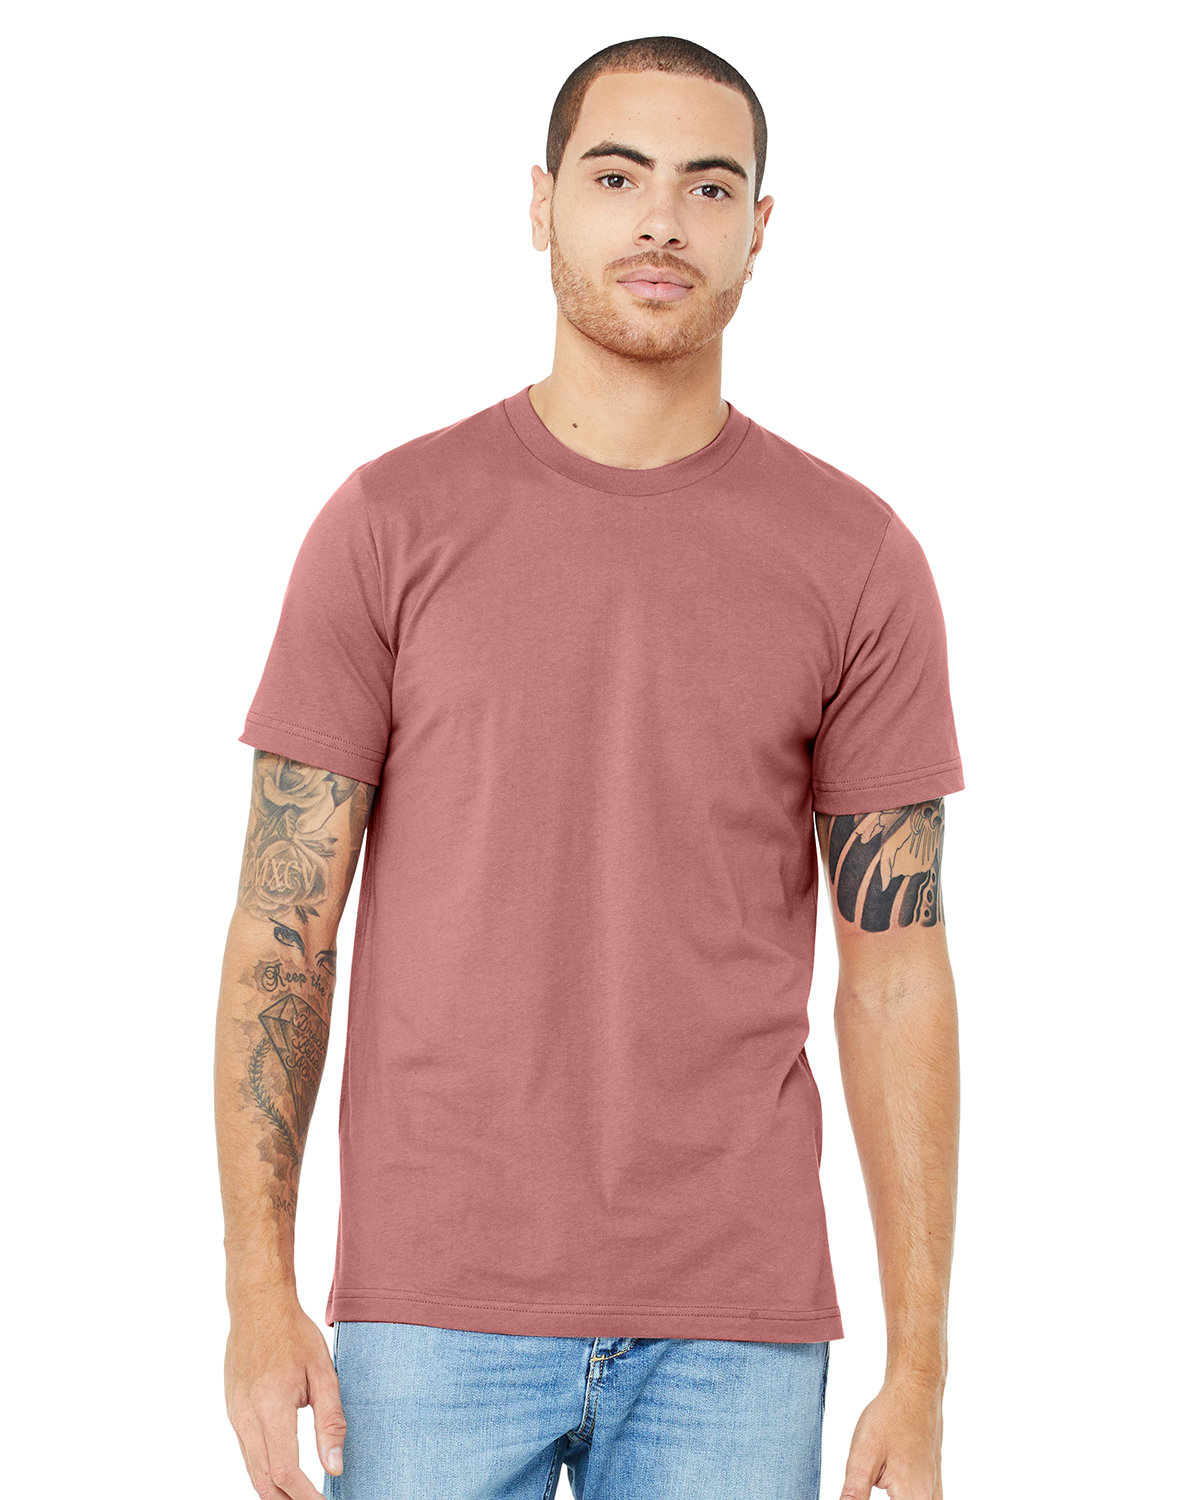 Bella + Canvas Unisex Made In The USA Jersey T-Shirt MAUVE 